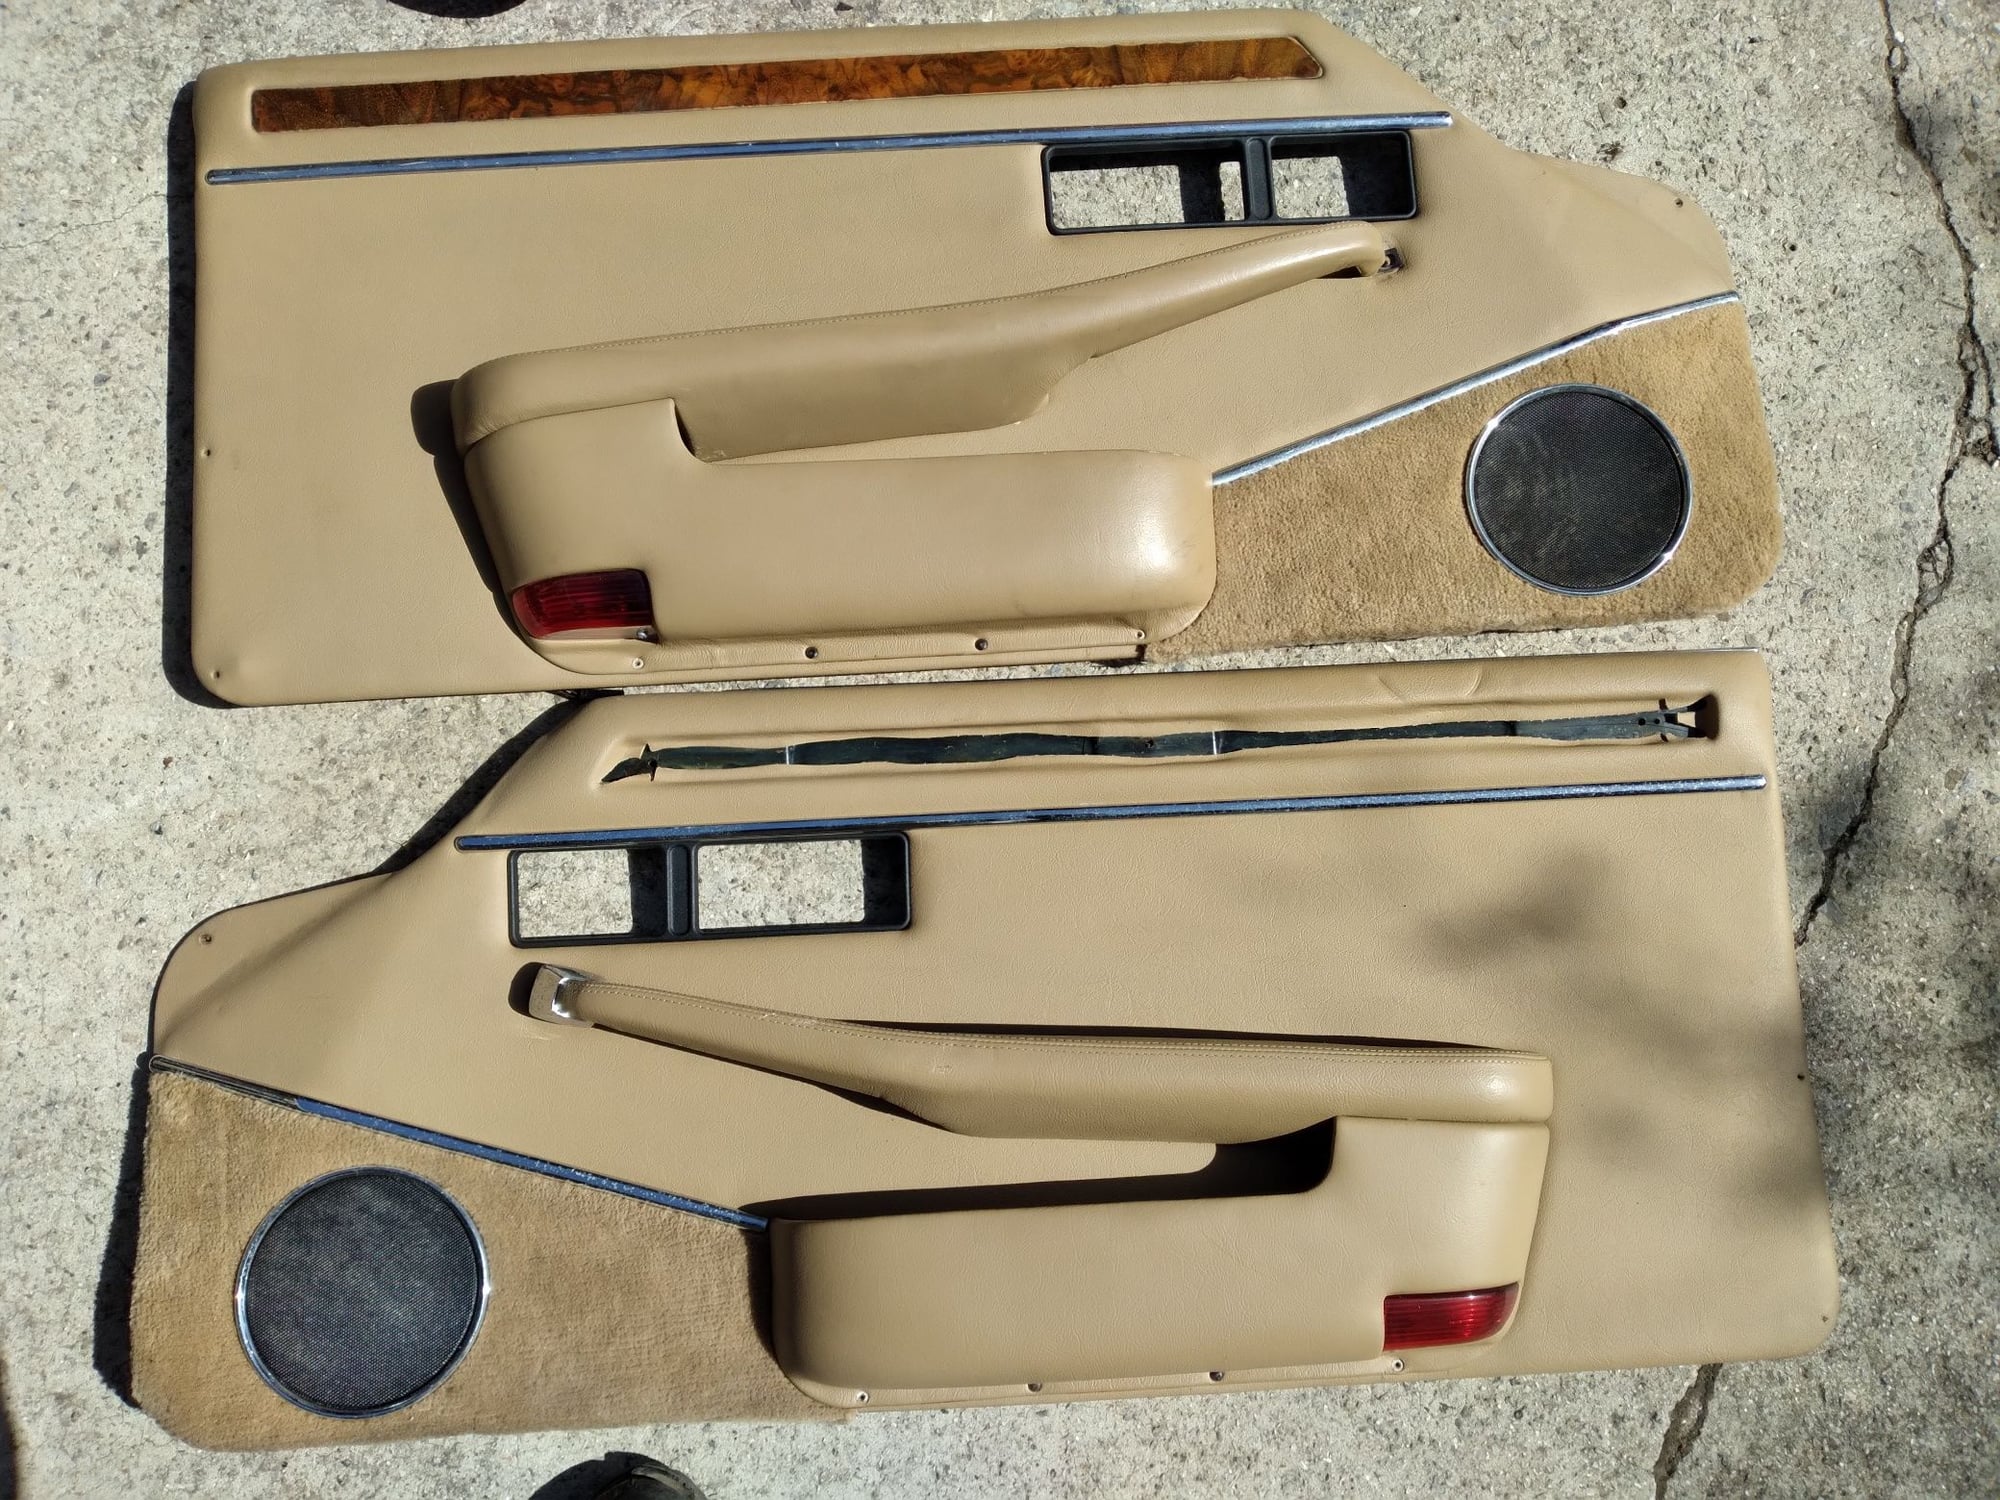 Interior/Upholstery - XJS door cards - Used - 1994 to 1996 Jaguar XJS - Pacifica, CA 94044, United States